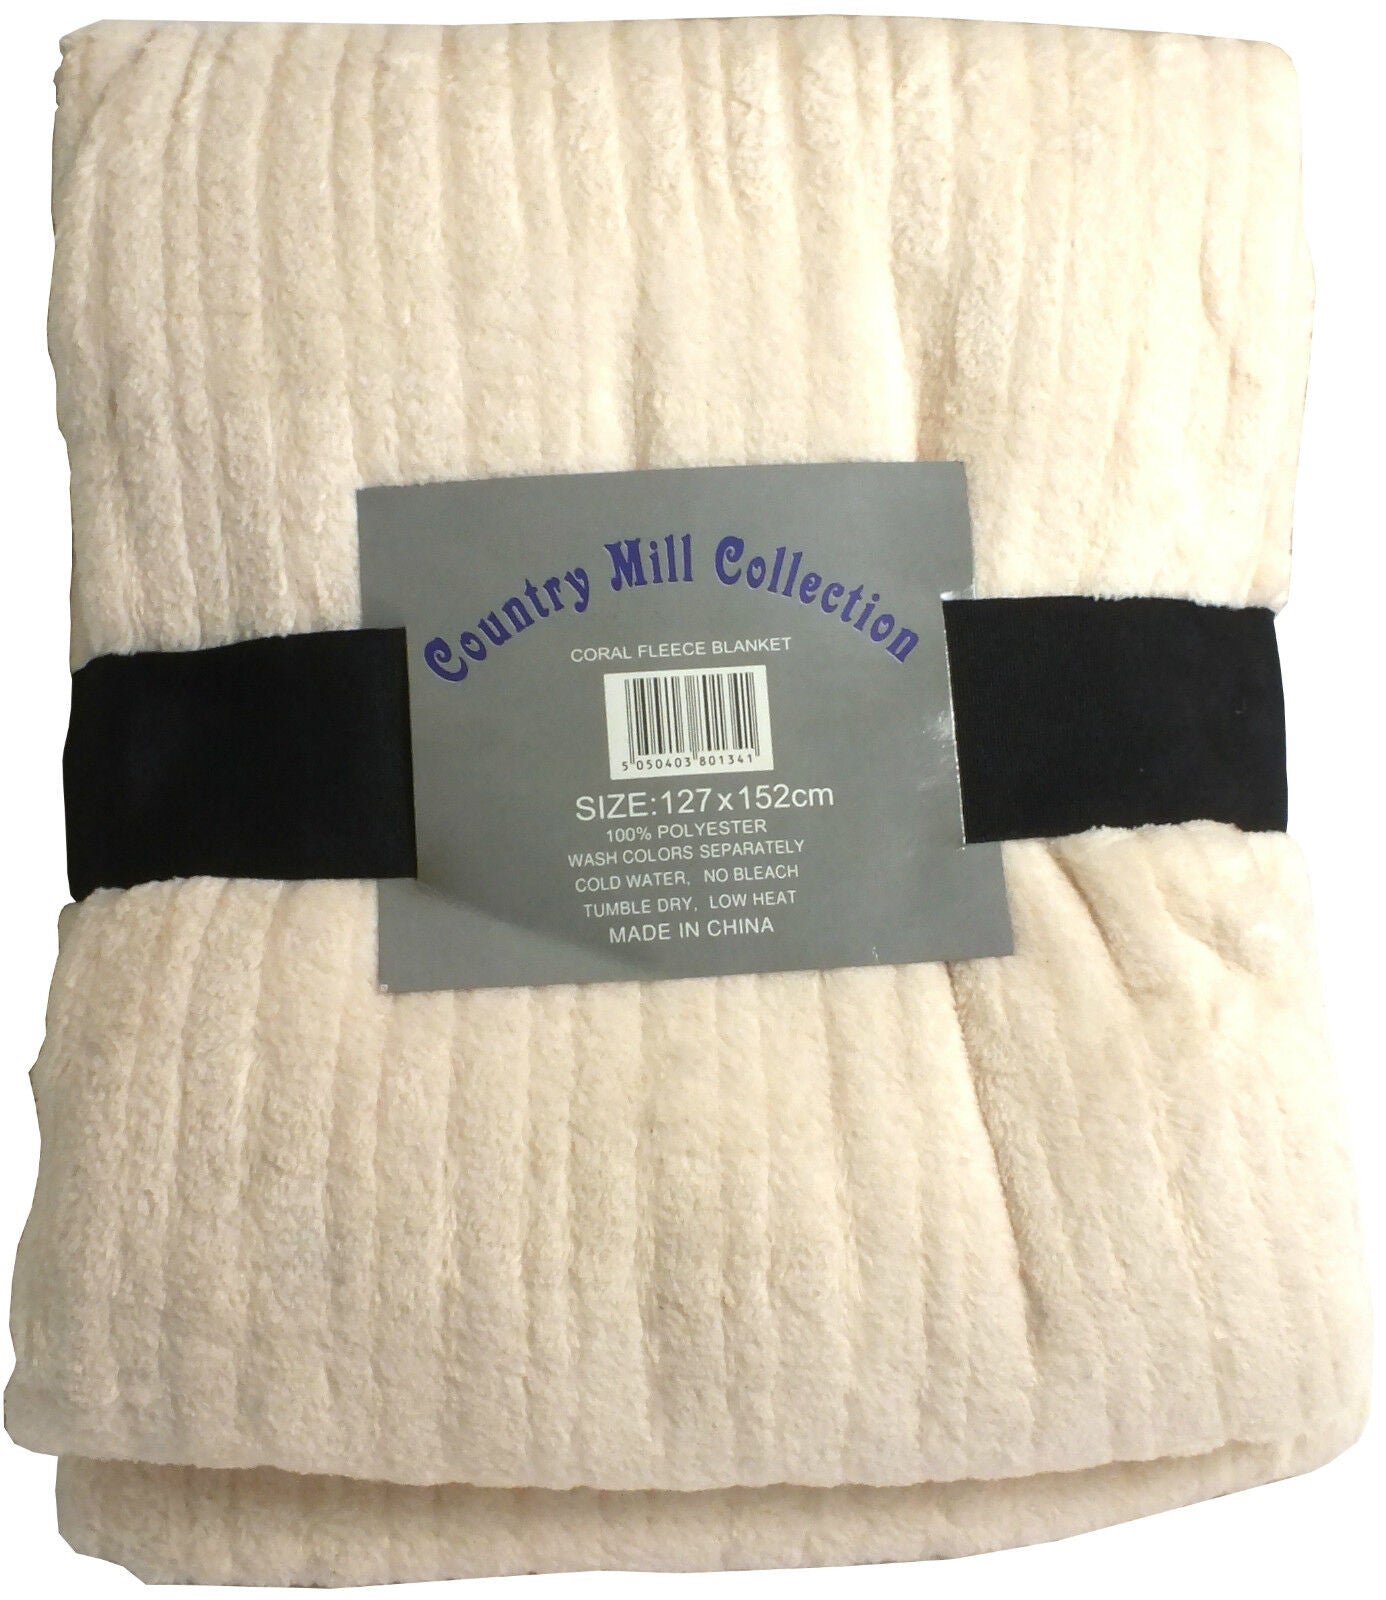 Country mill collection Cream ( Coral Fleece Blanket ) Size: 127 x 152cm